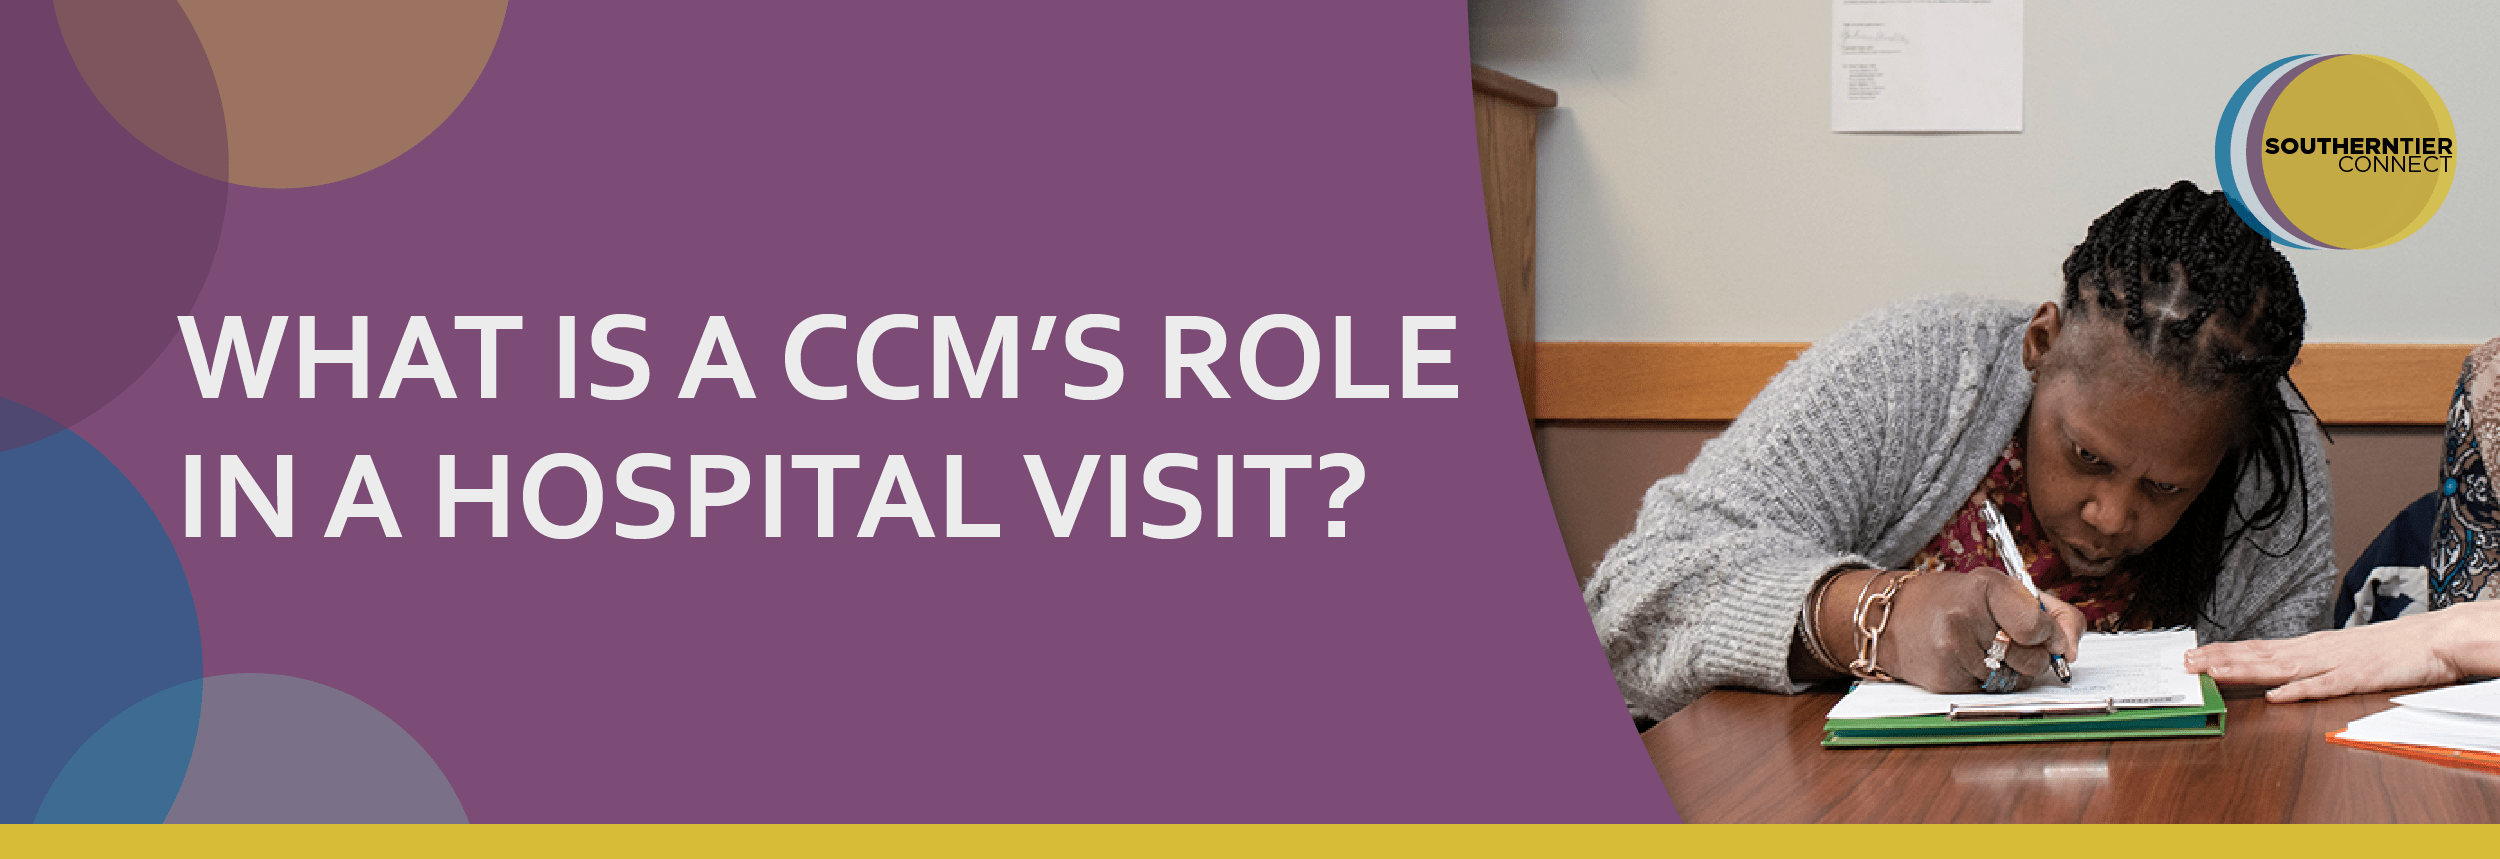 What is a CCMs role in a hospital visit?